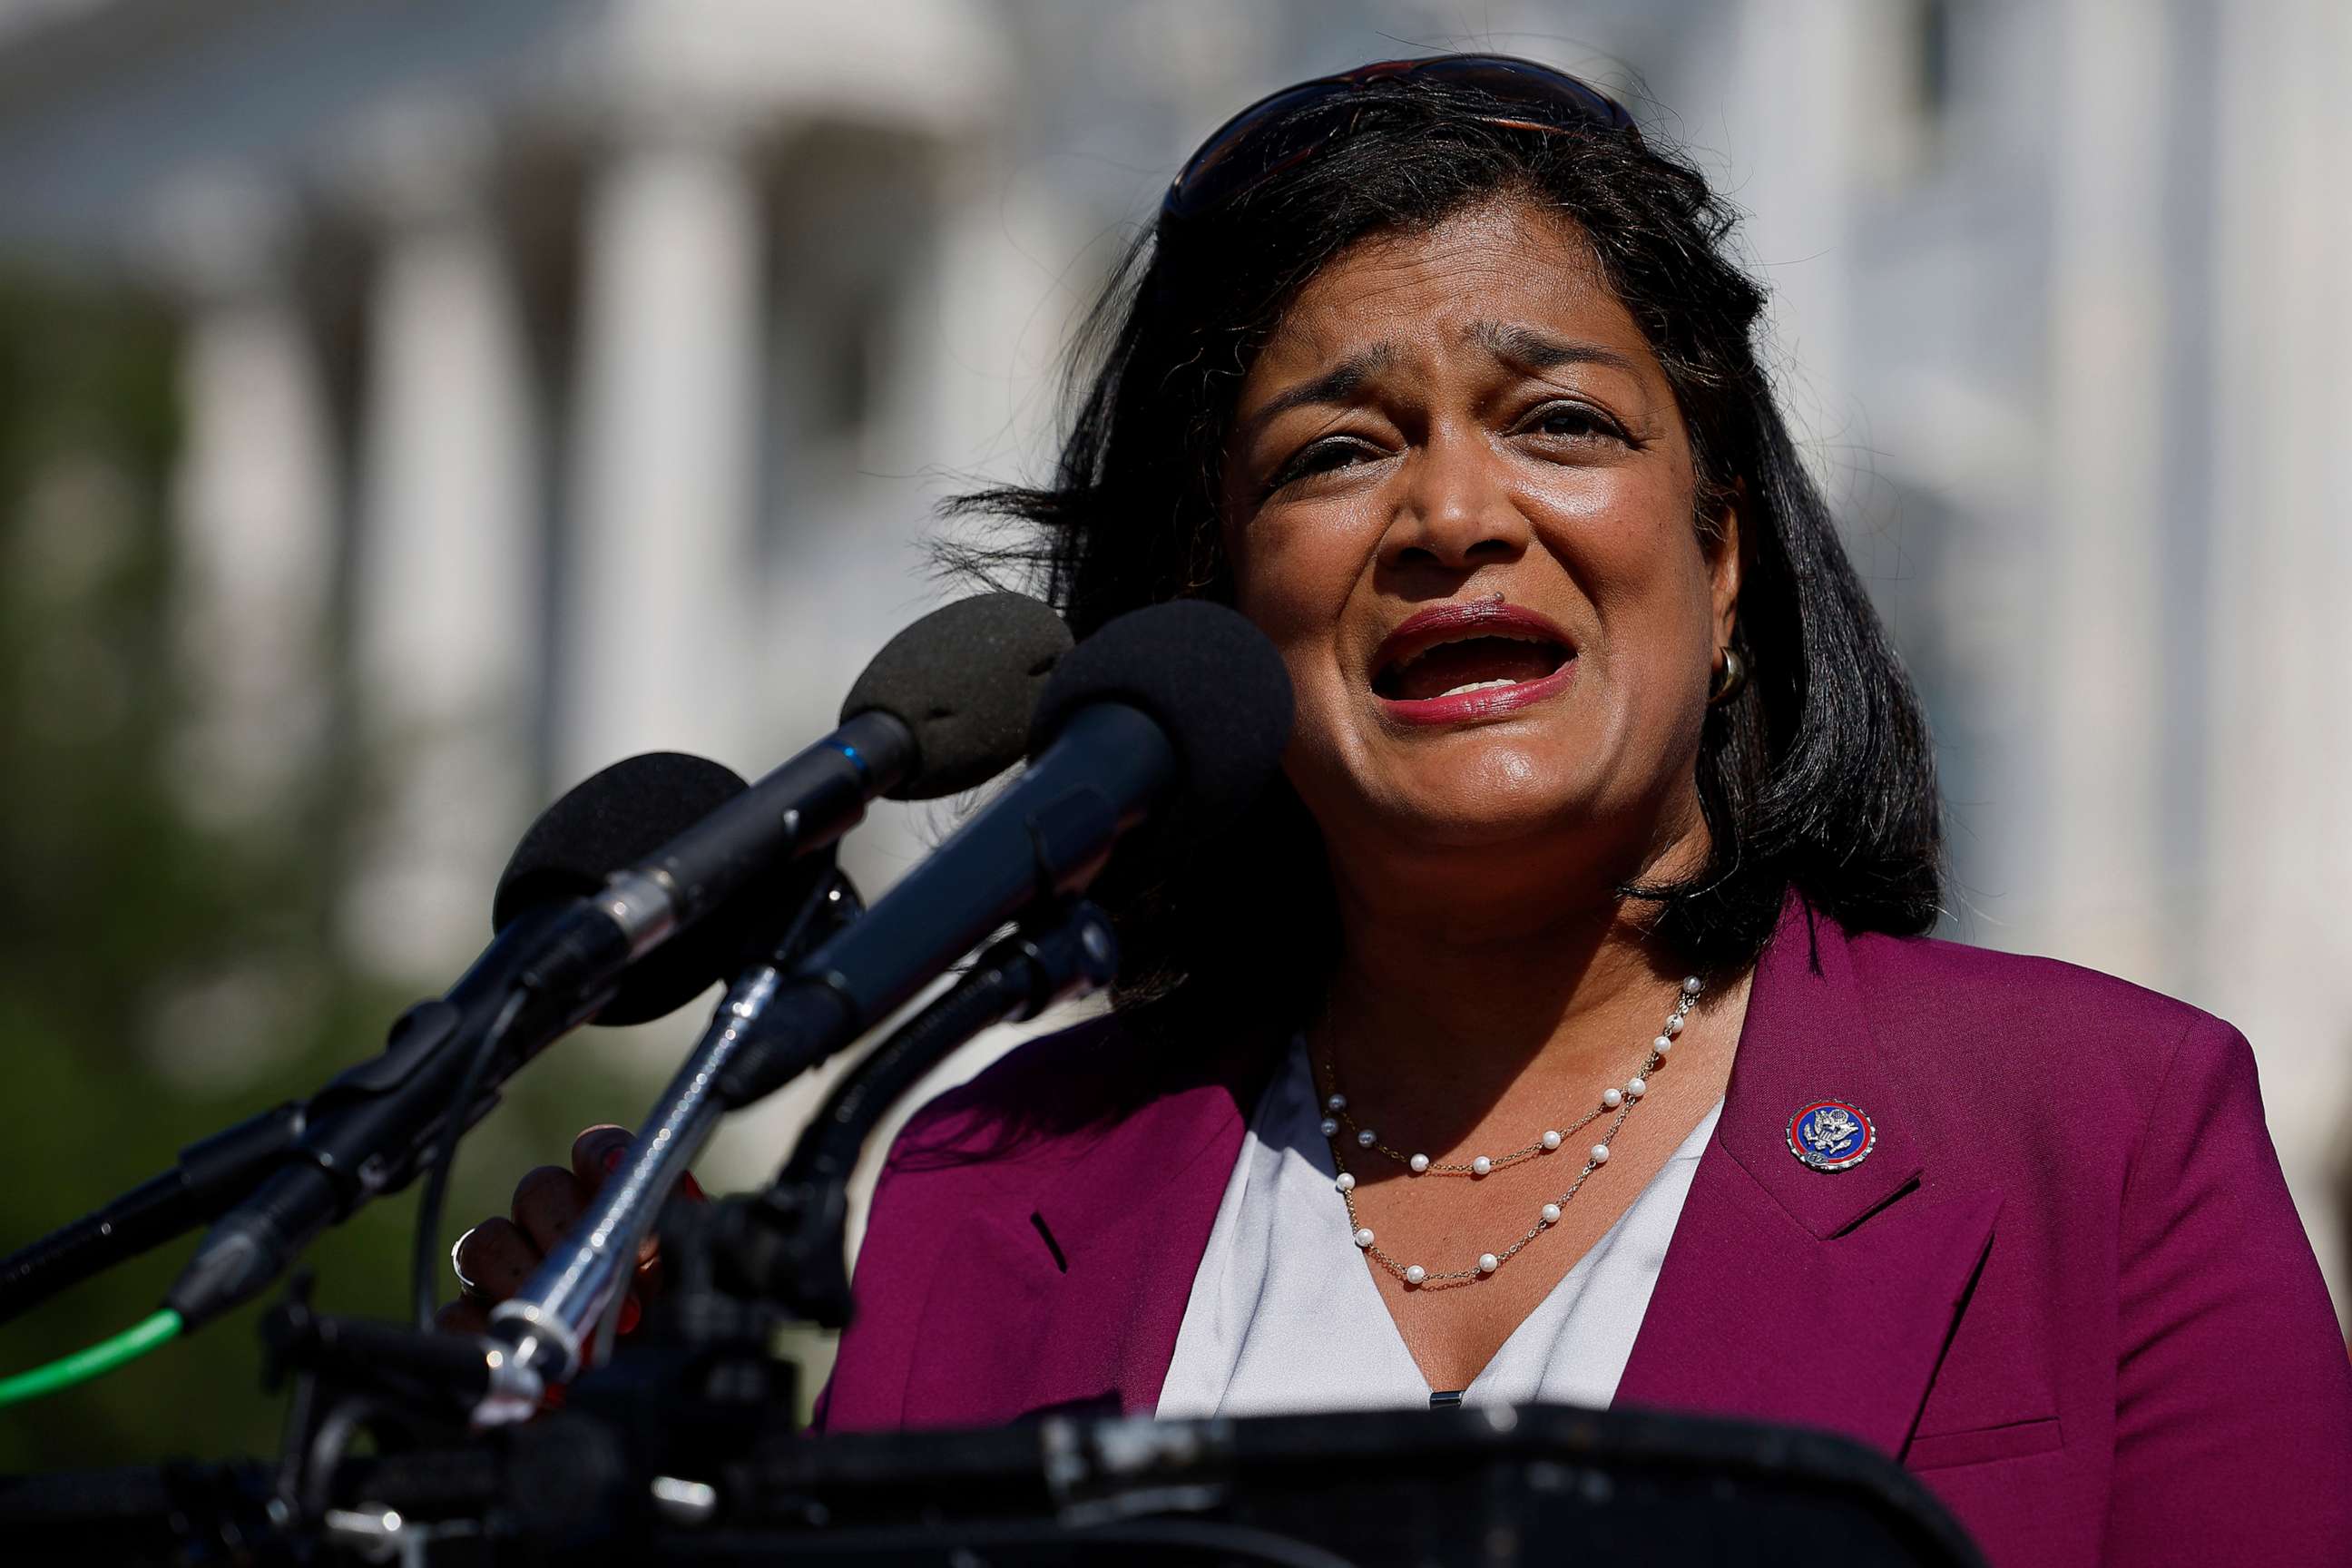 PHOTO: Rep. Pramila Jayapal (D-WA) and fellow members of the House Progressive Caucus hold a news conference ahead of the vote on the Inflation Reduction Act of 2022 outside the U.S. Capitol, Aug. 12, 2022, in Washington.